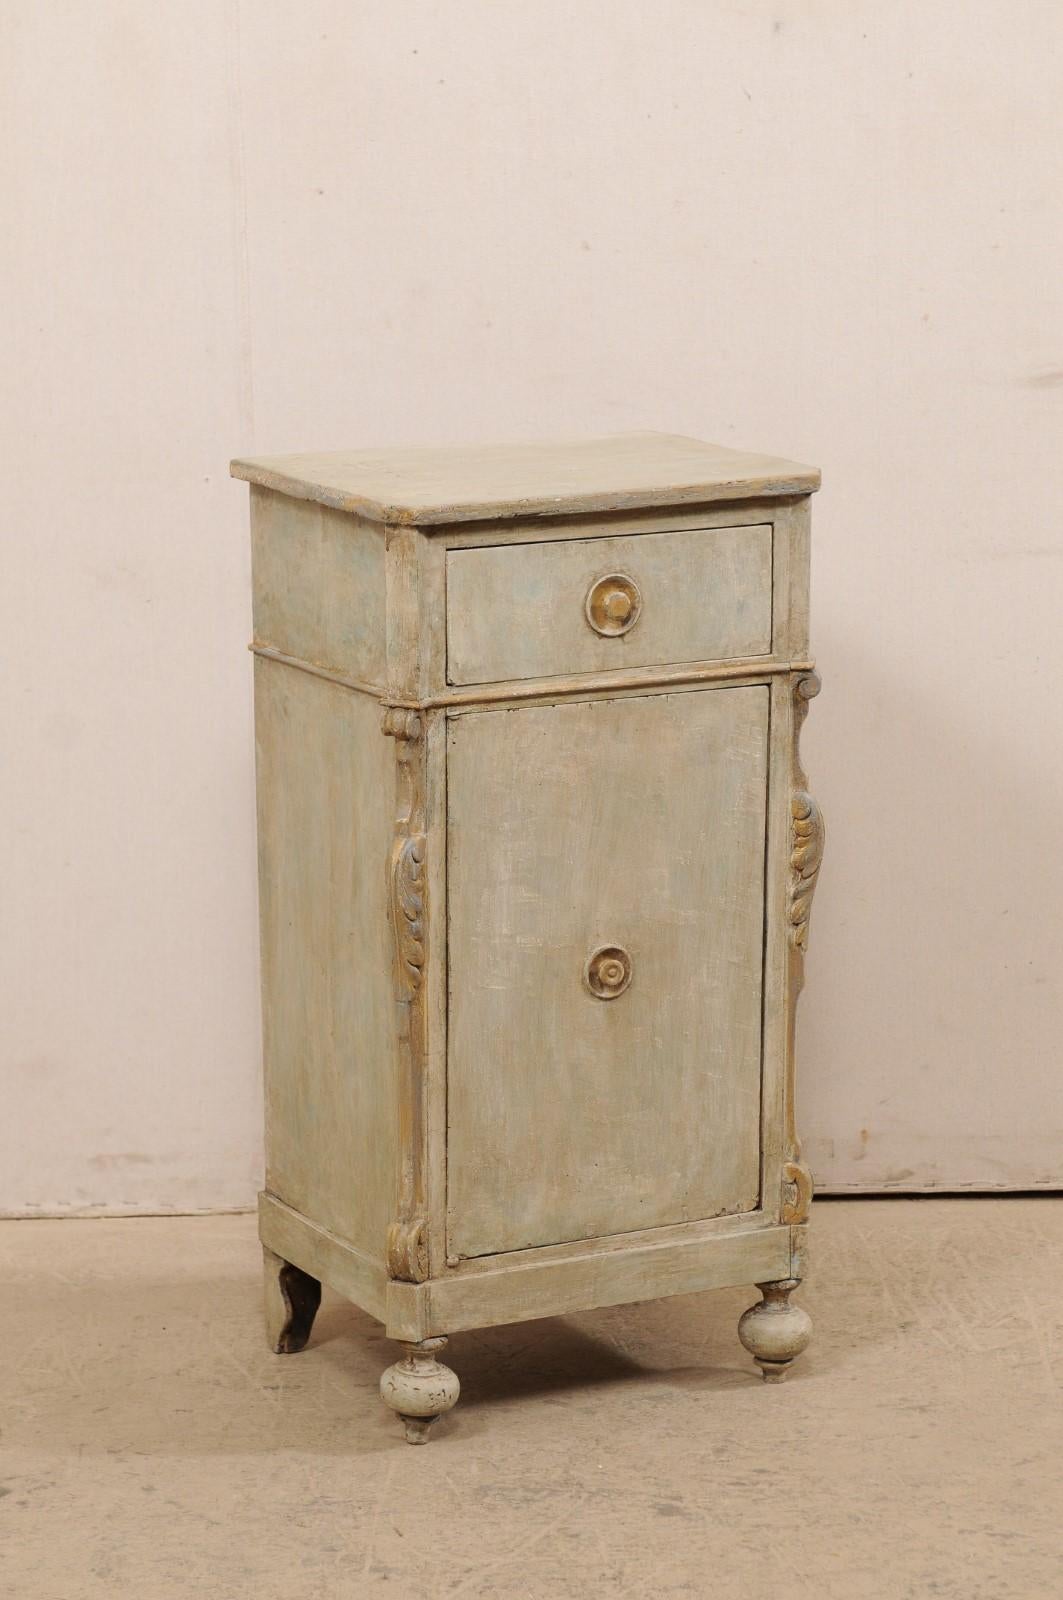 A small-sized Central European painted wood cabinet with single drawer and door from the 19th century. This sweet little cabinet from Central Europe is fitted with a small-sized single drawer within it's apron, resting just above a single door which